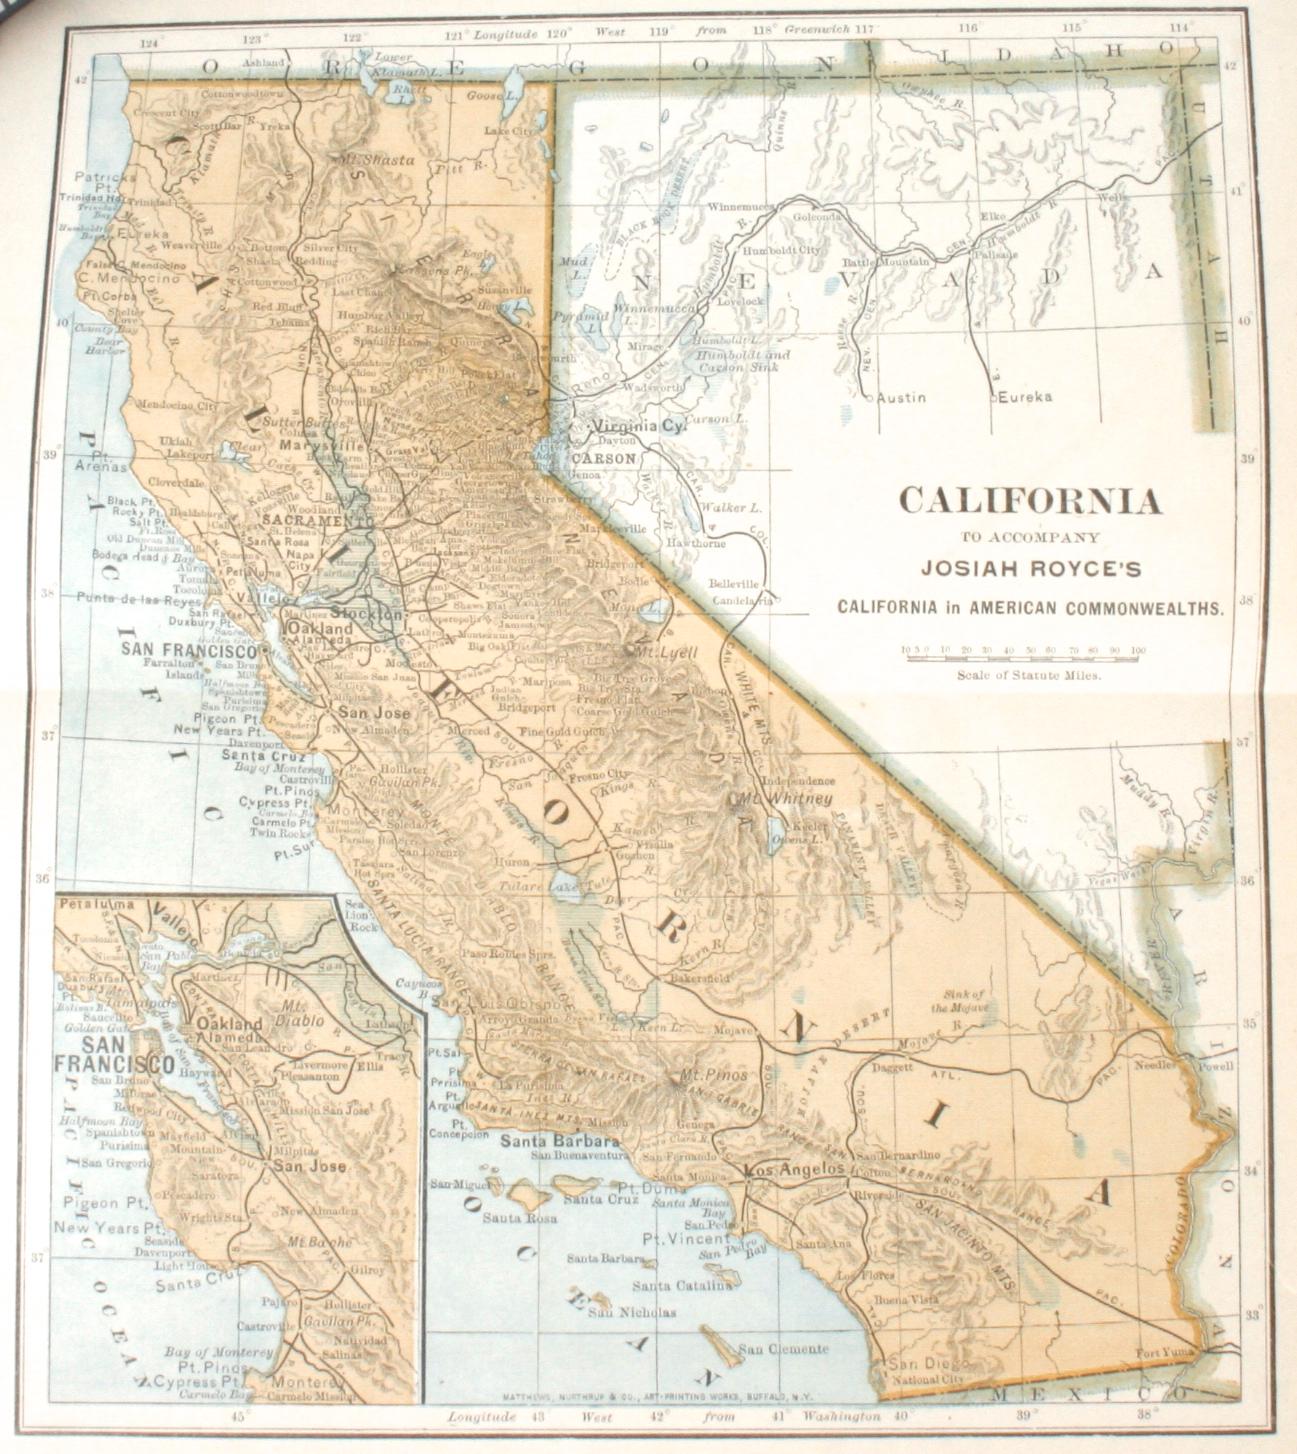 California, a study in American Character by Josiah Royce. Boston: Houghton, Mifflin and Company, 1892. Moroccan and marbleized paper bound hardcover. 513 pp. Pages are uncut. An antique history book on the state of California, one in a series on